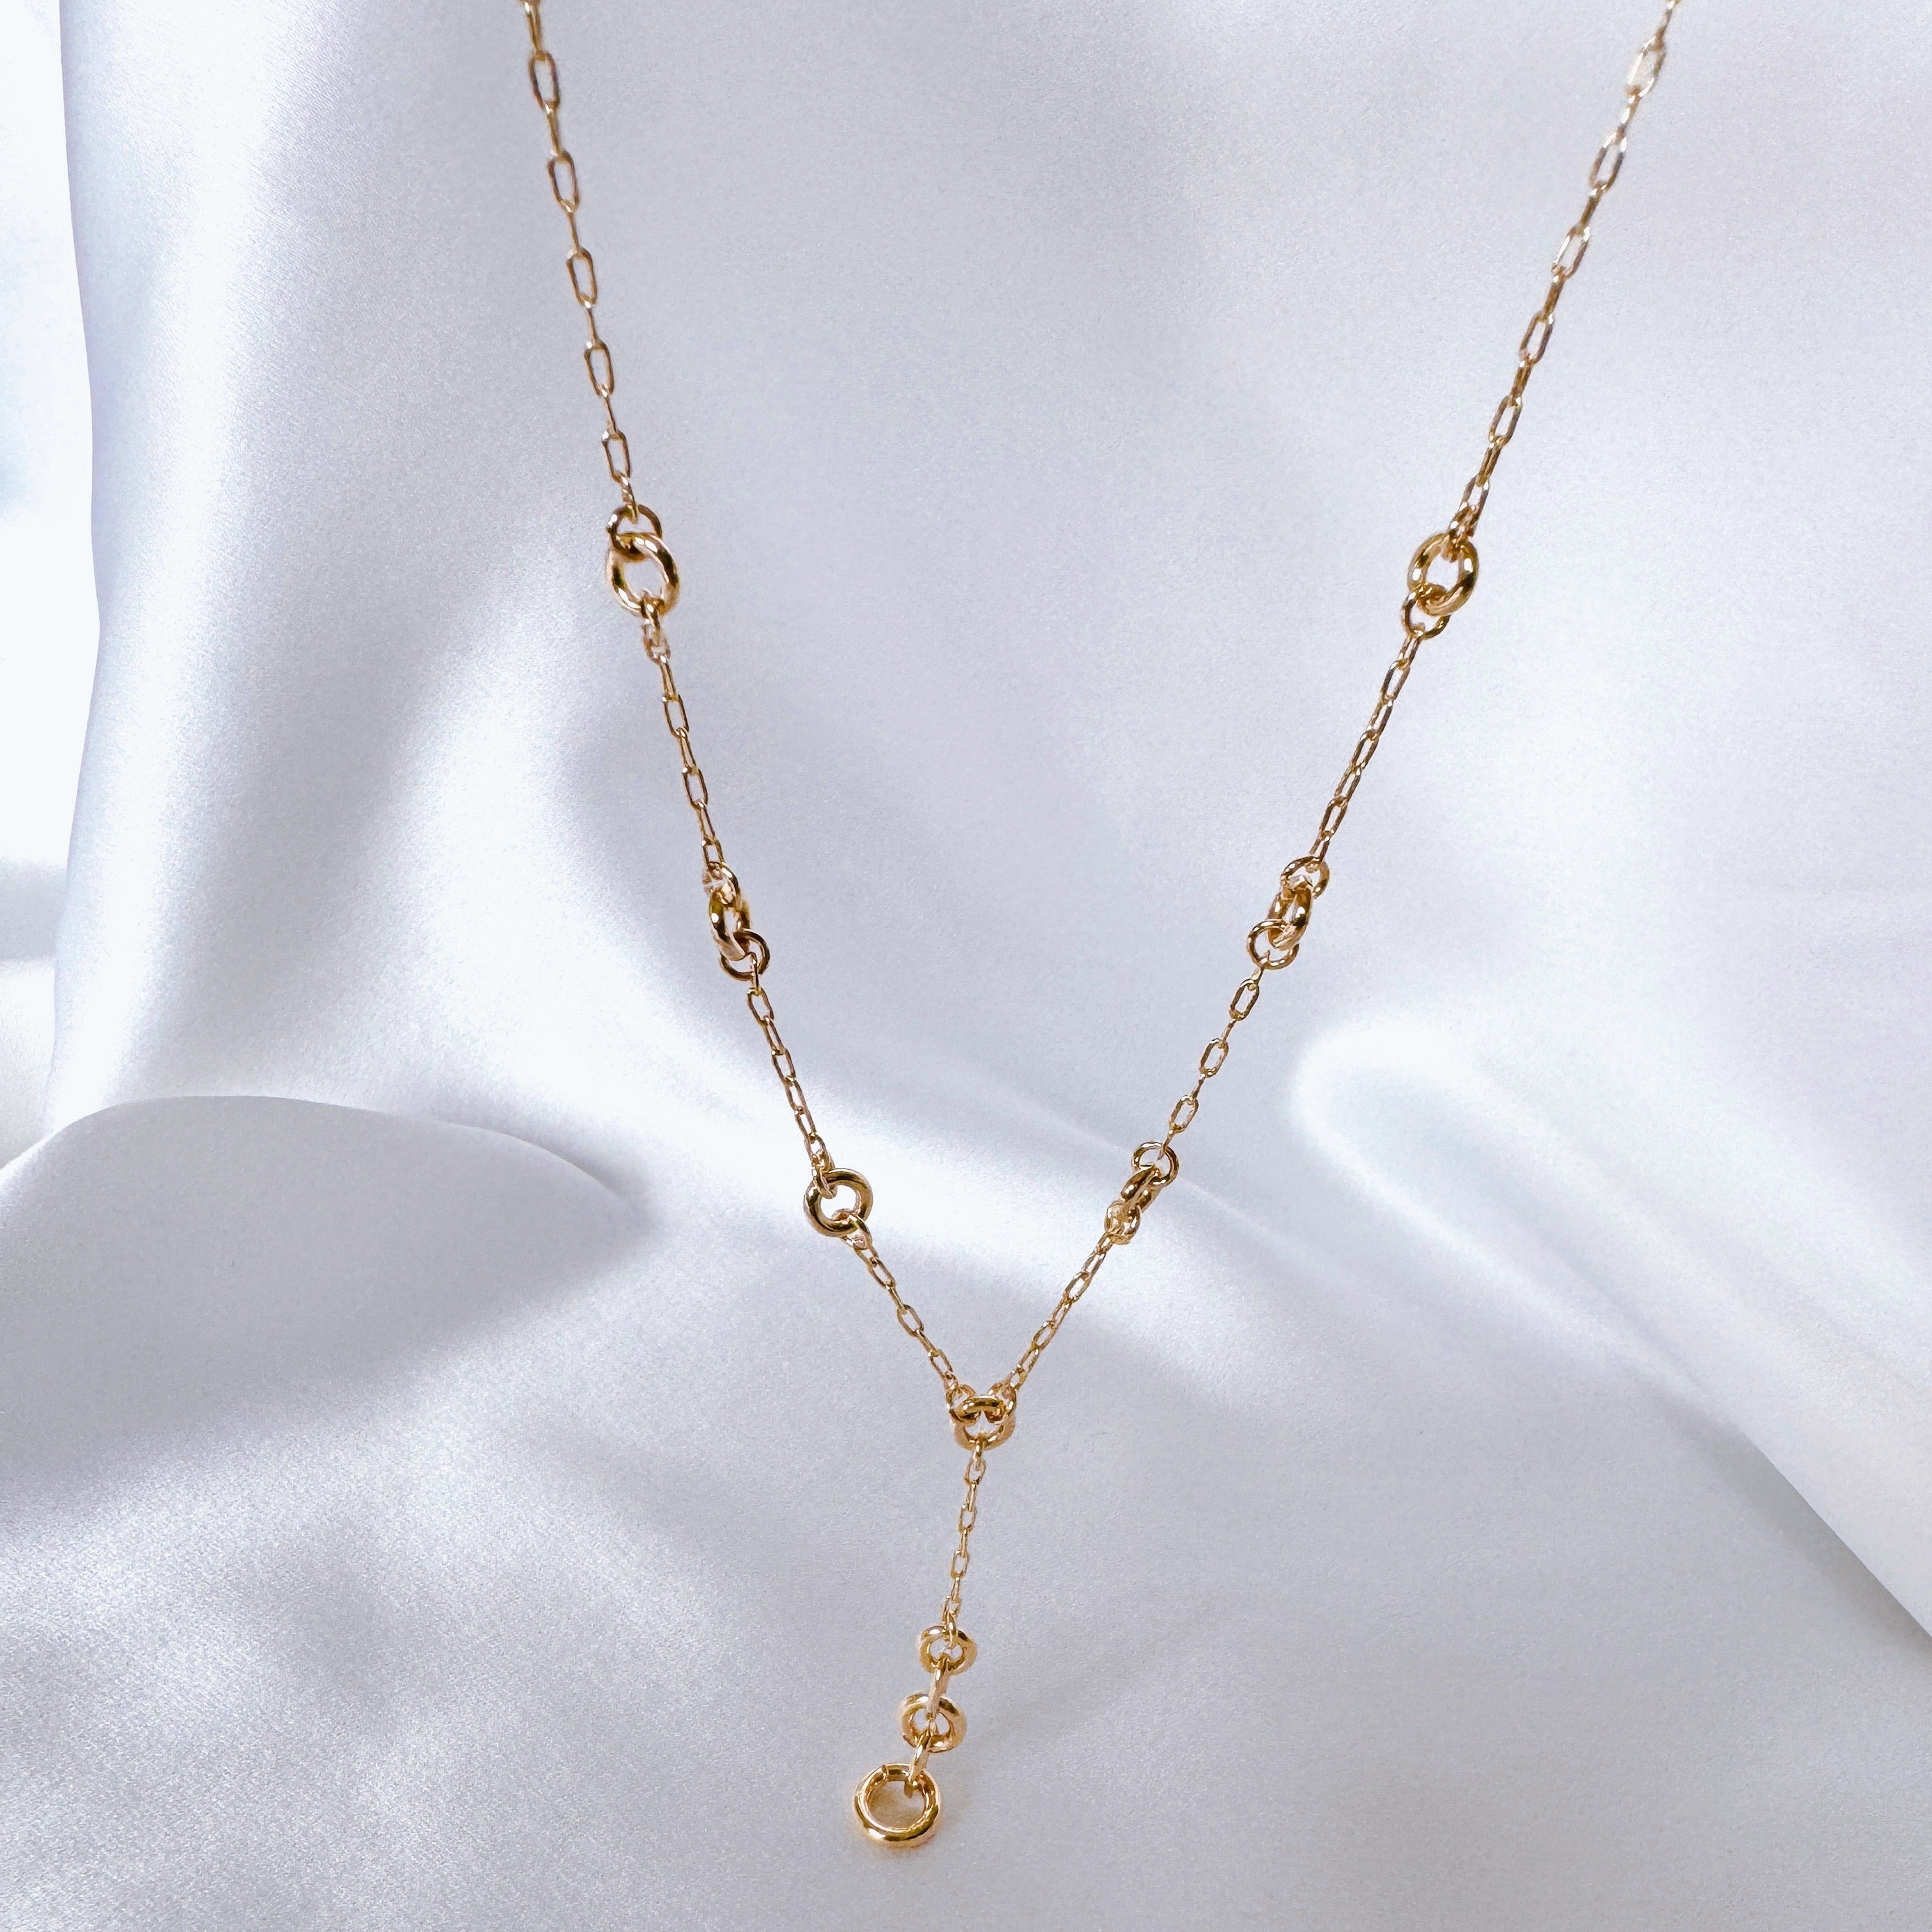 Gold-plated “Chain” necklace